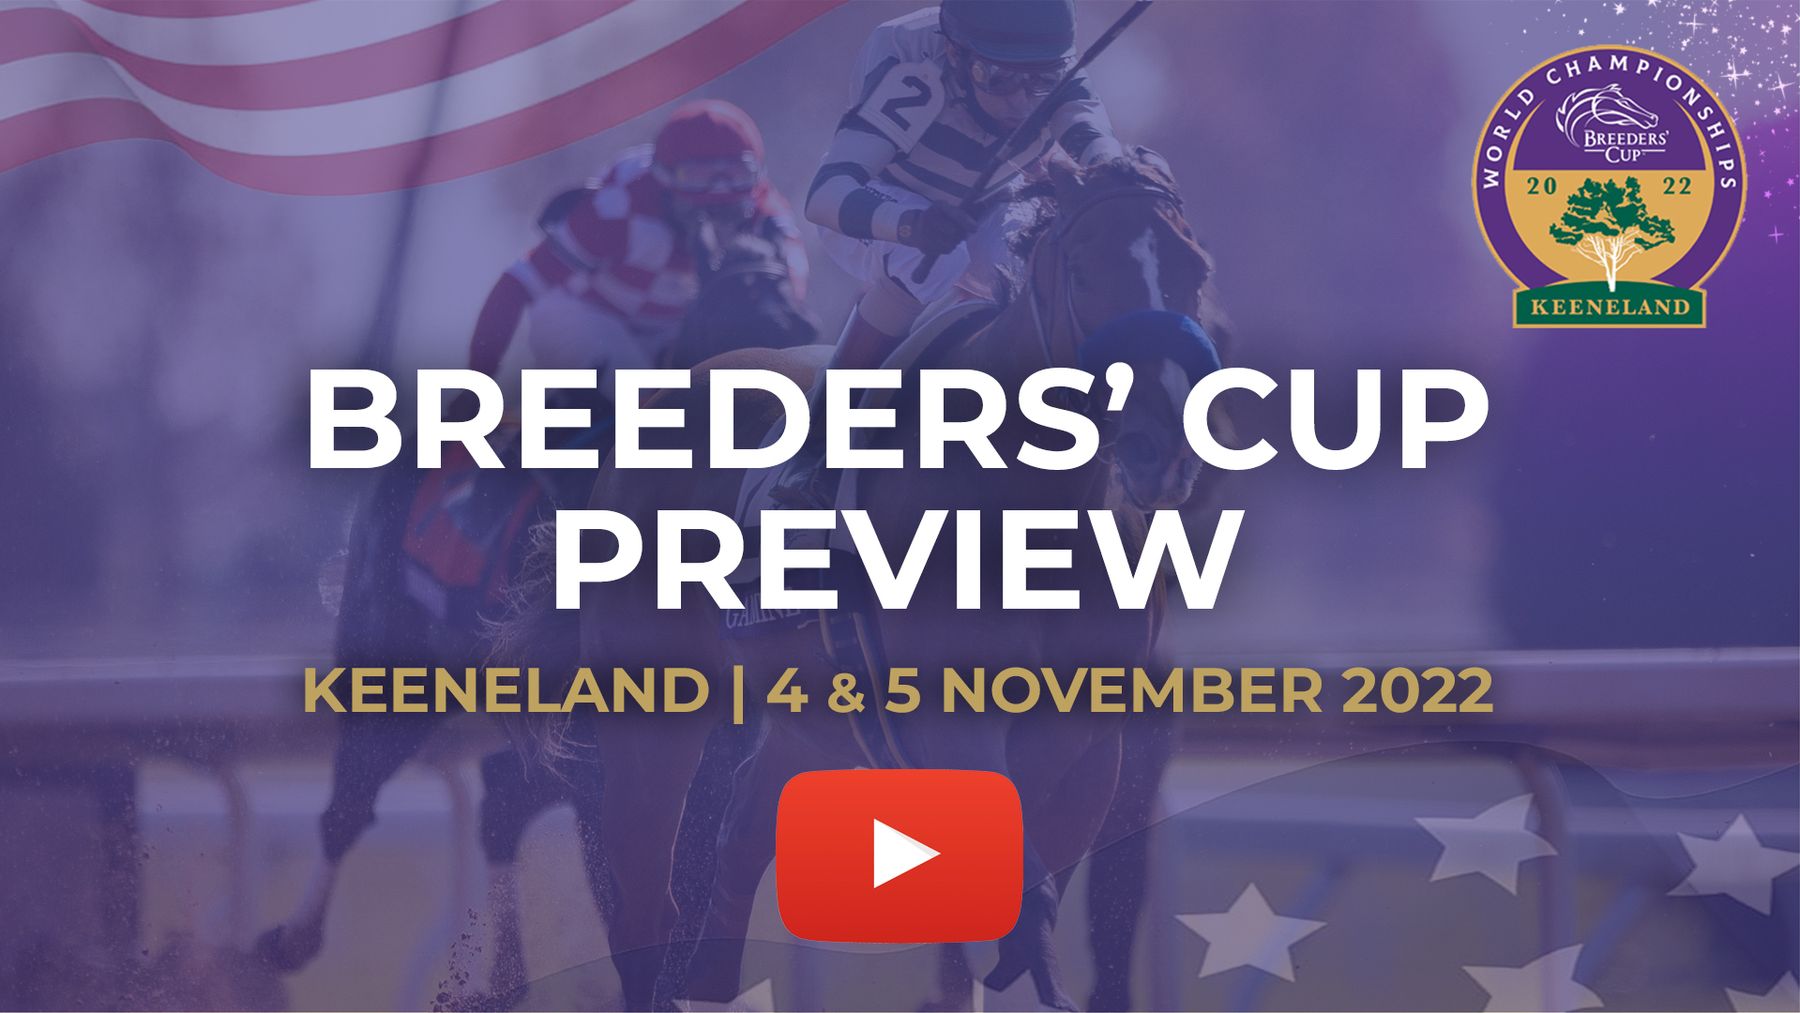 WATCH Breeders' Cup video previews and tips